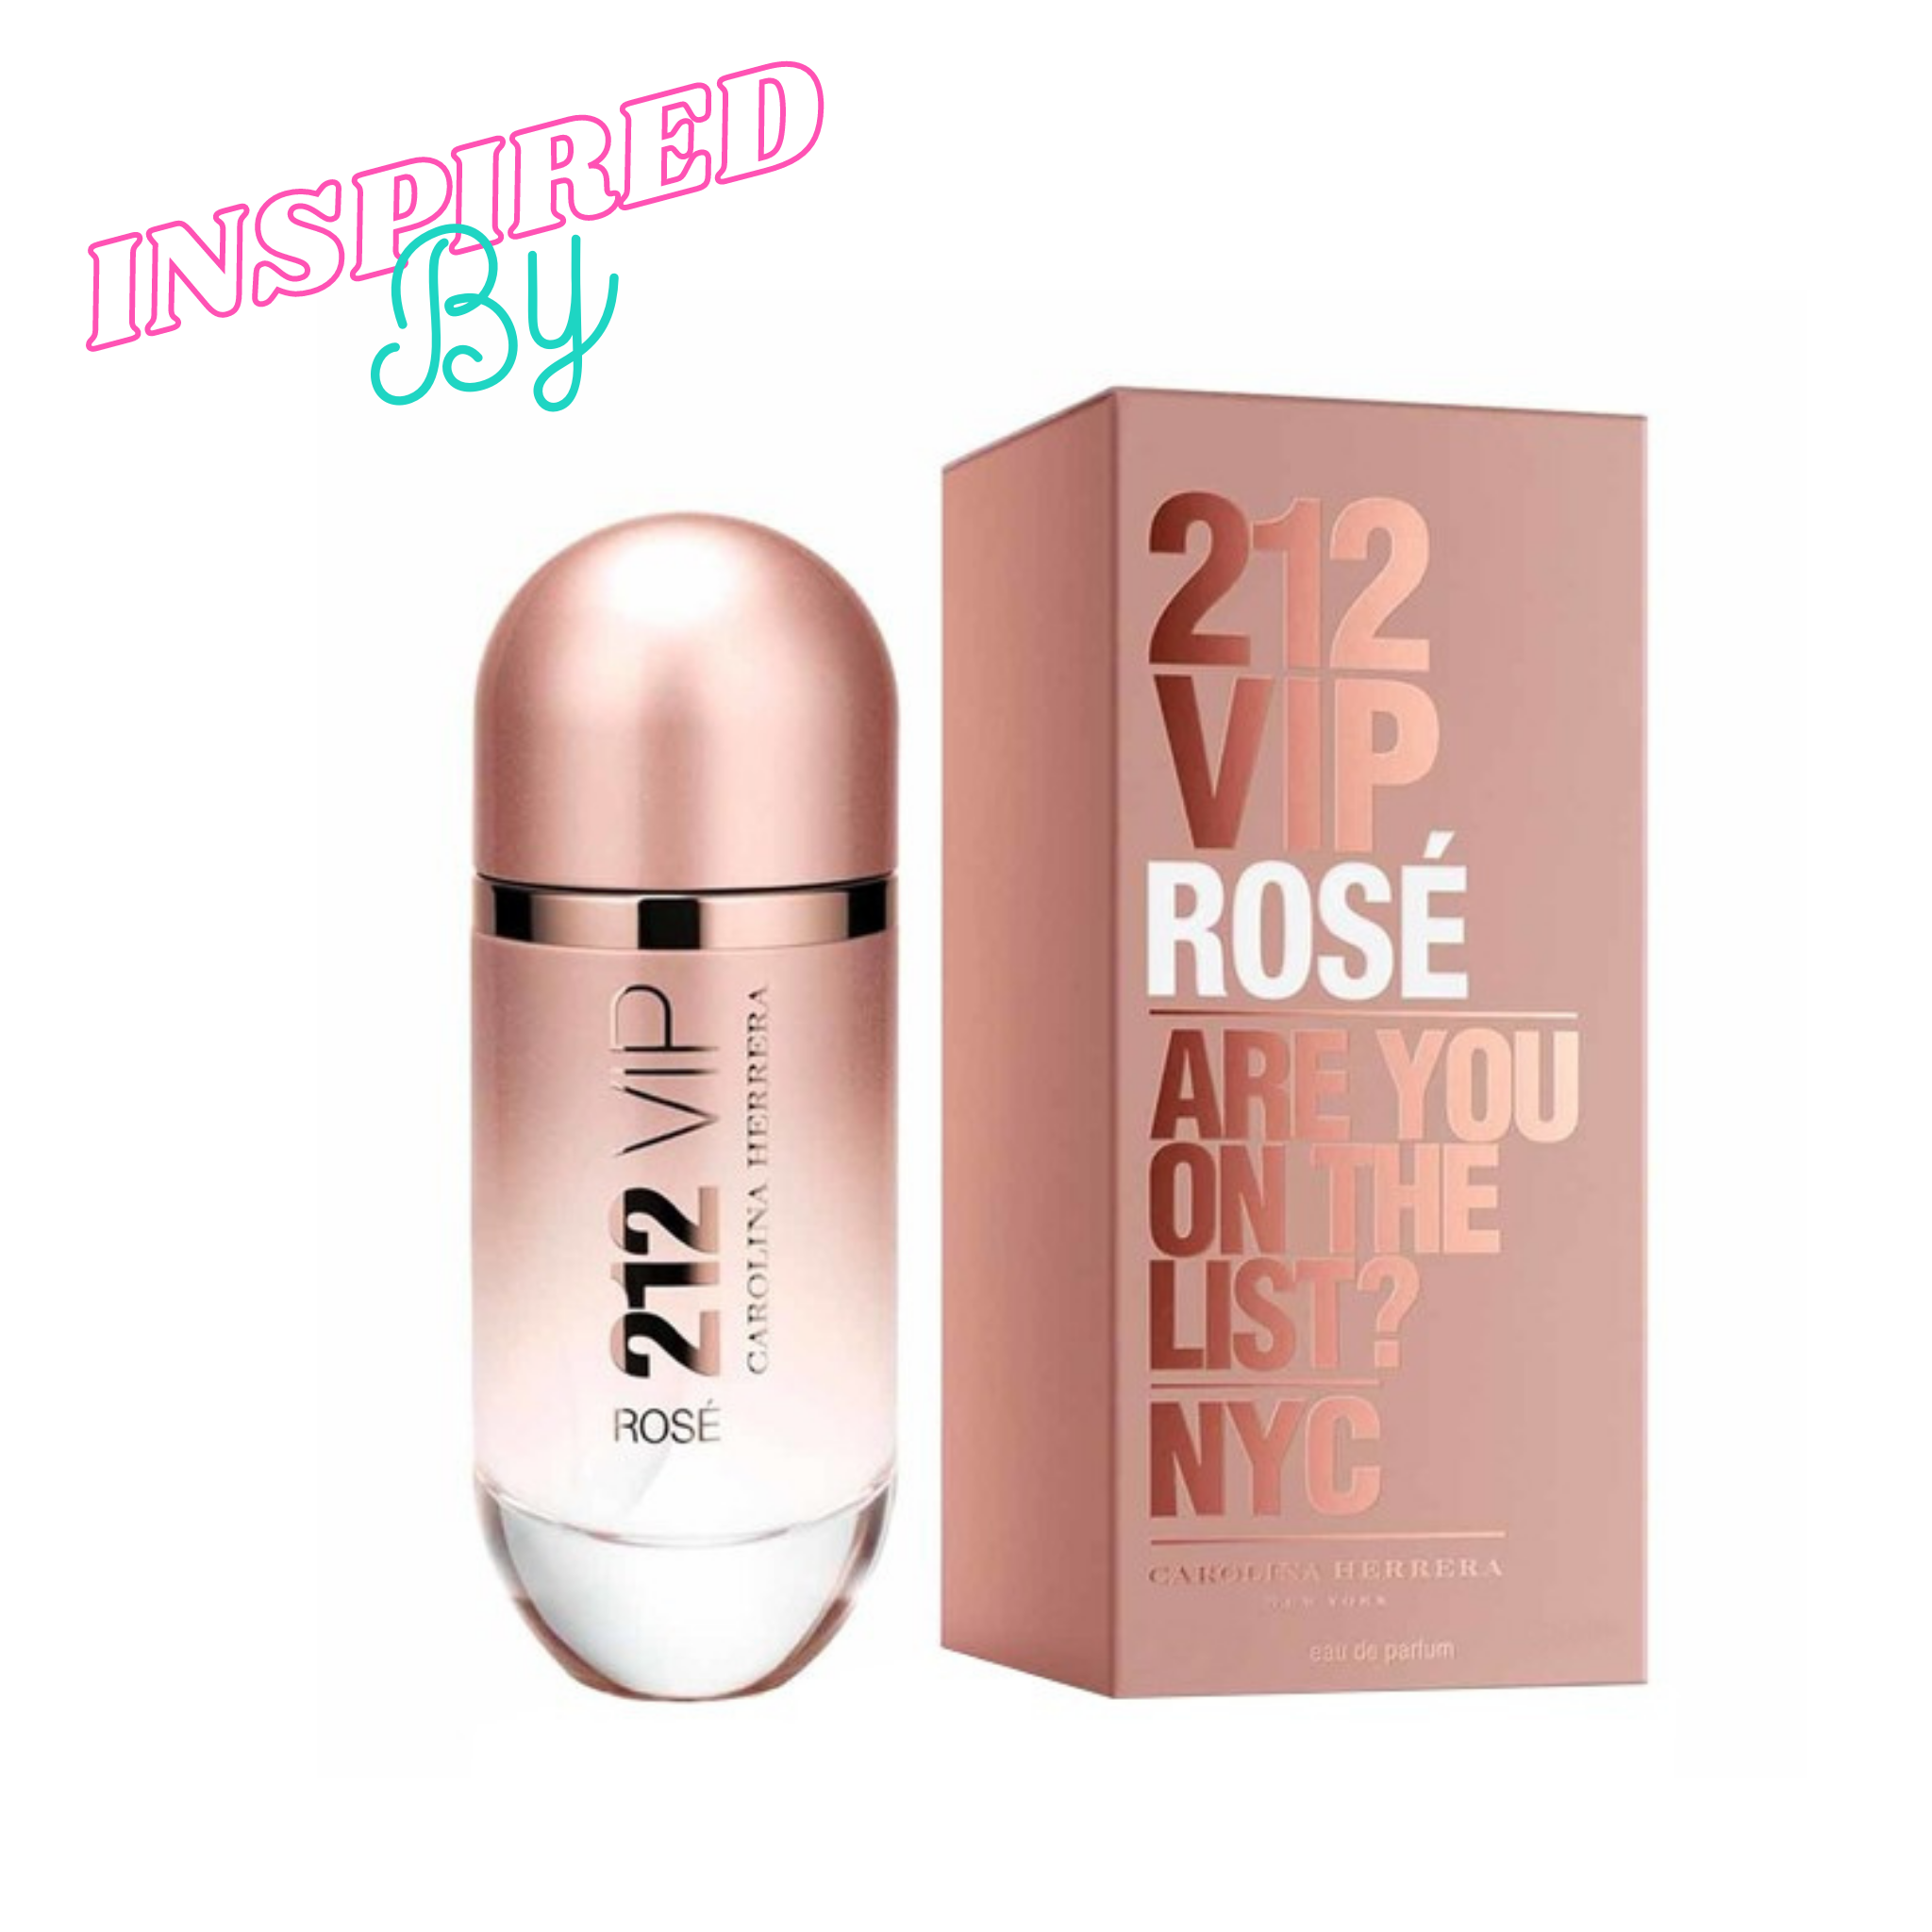 Inspired by CH 212 VIP Rose 100ml - Fragrance Deliver SA